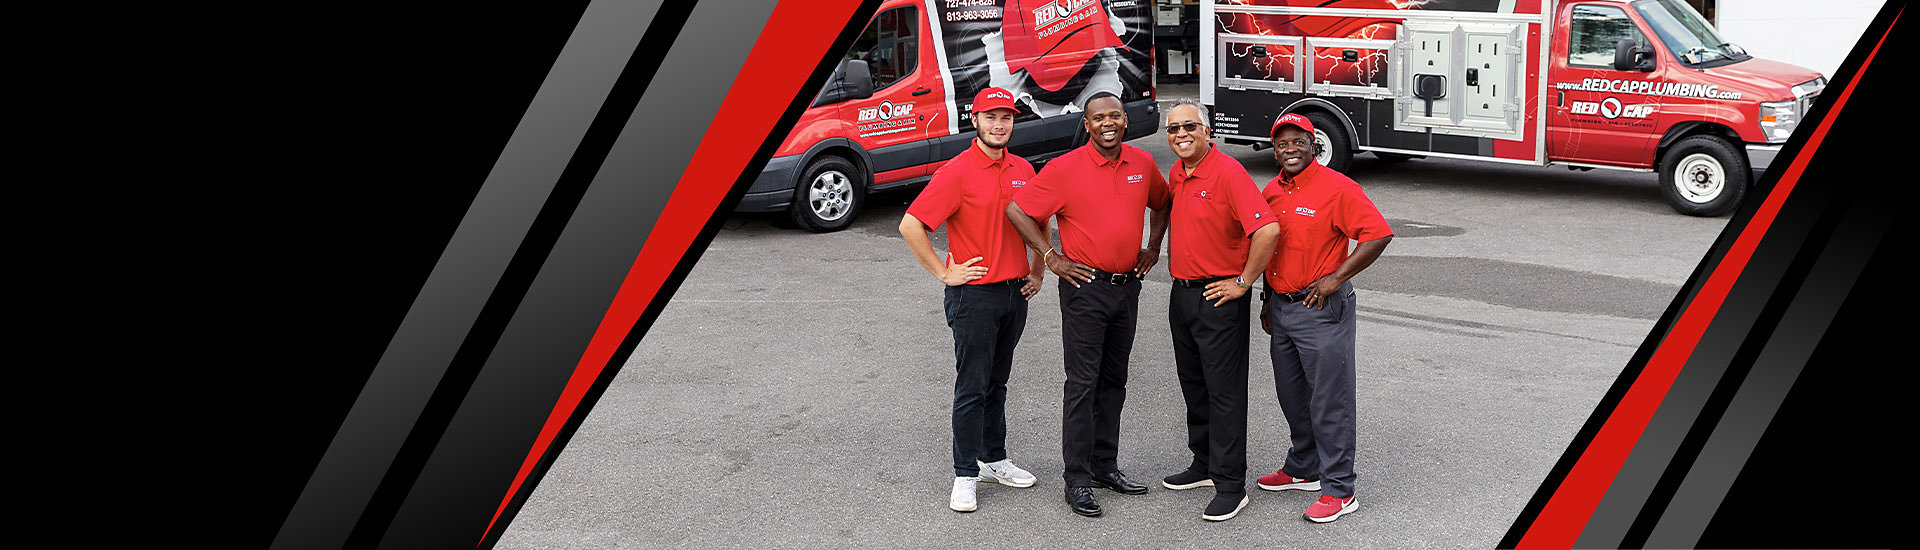 Three smiling Red Cap technicians standing in front of a company truck parket on a street in an neighborhood